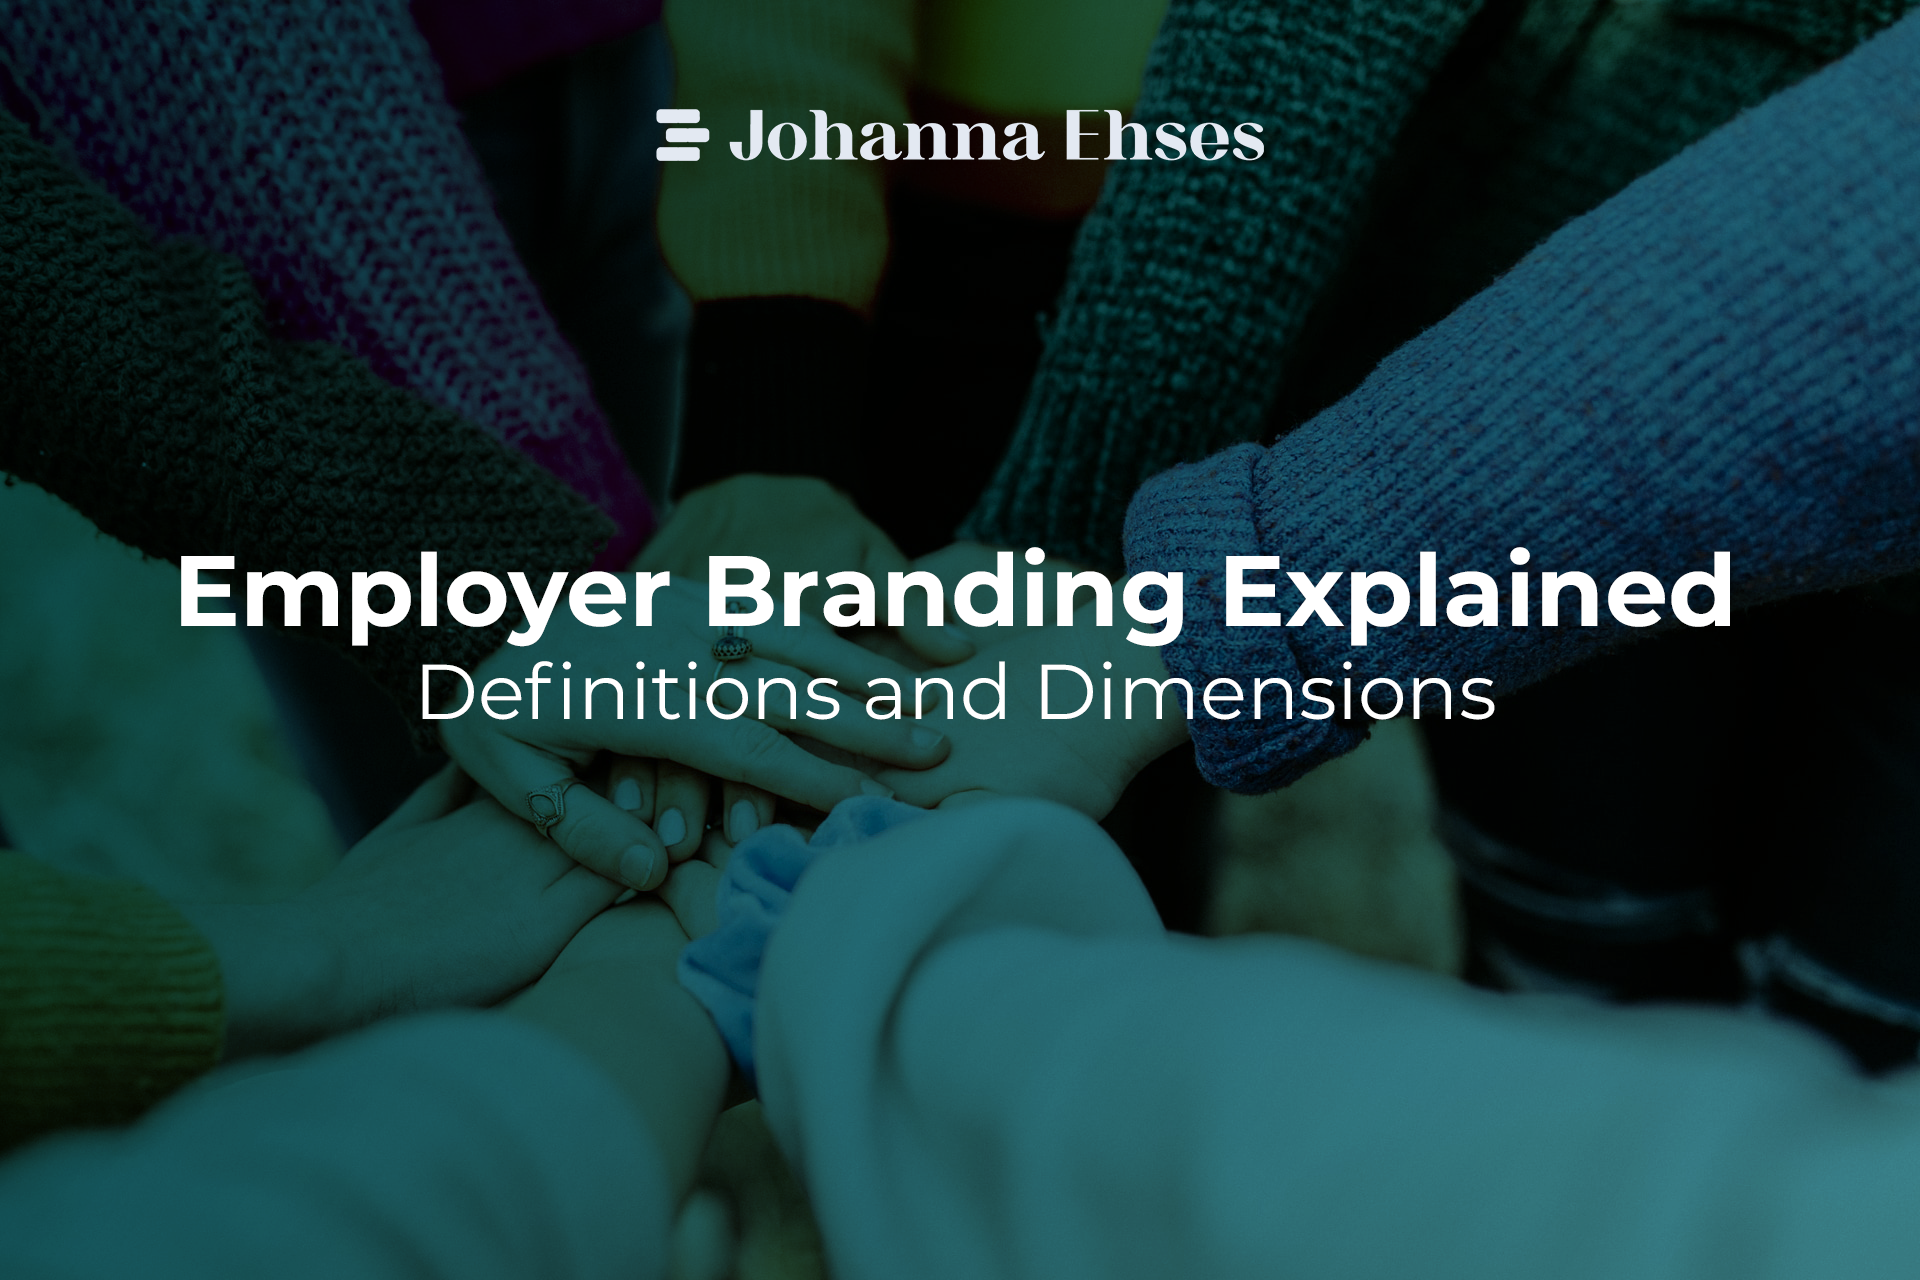 Emplyer Branding Explained with Definitions and Dimensions